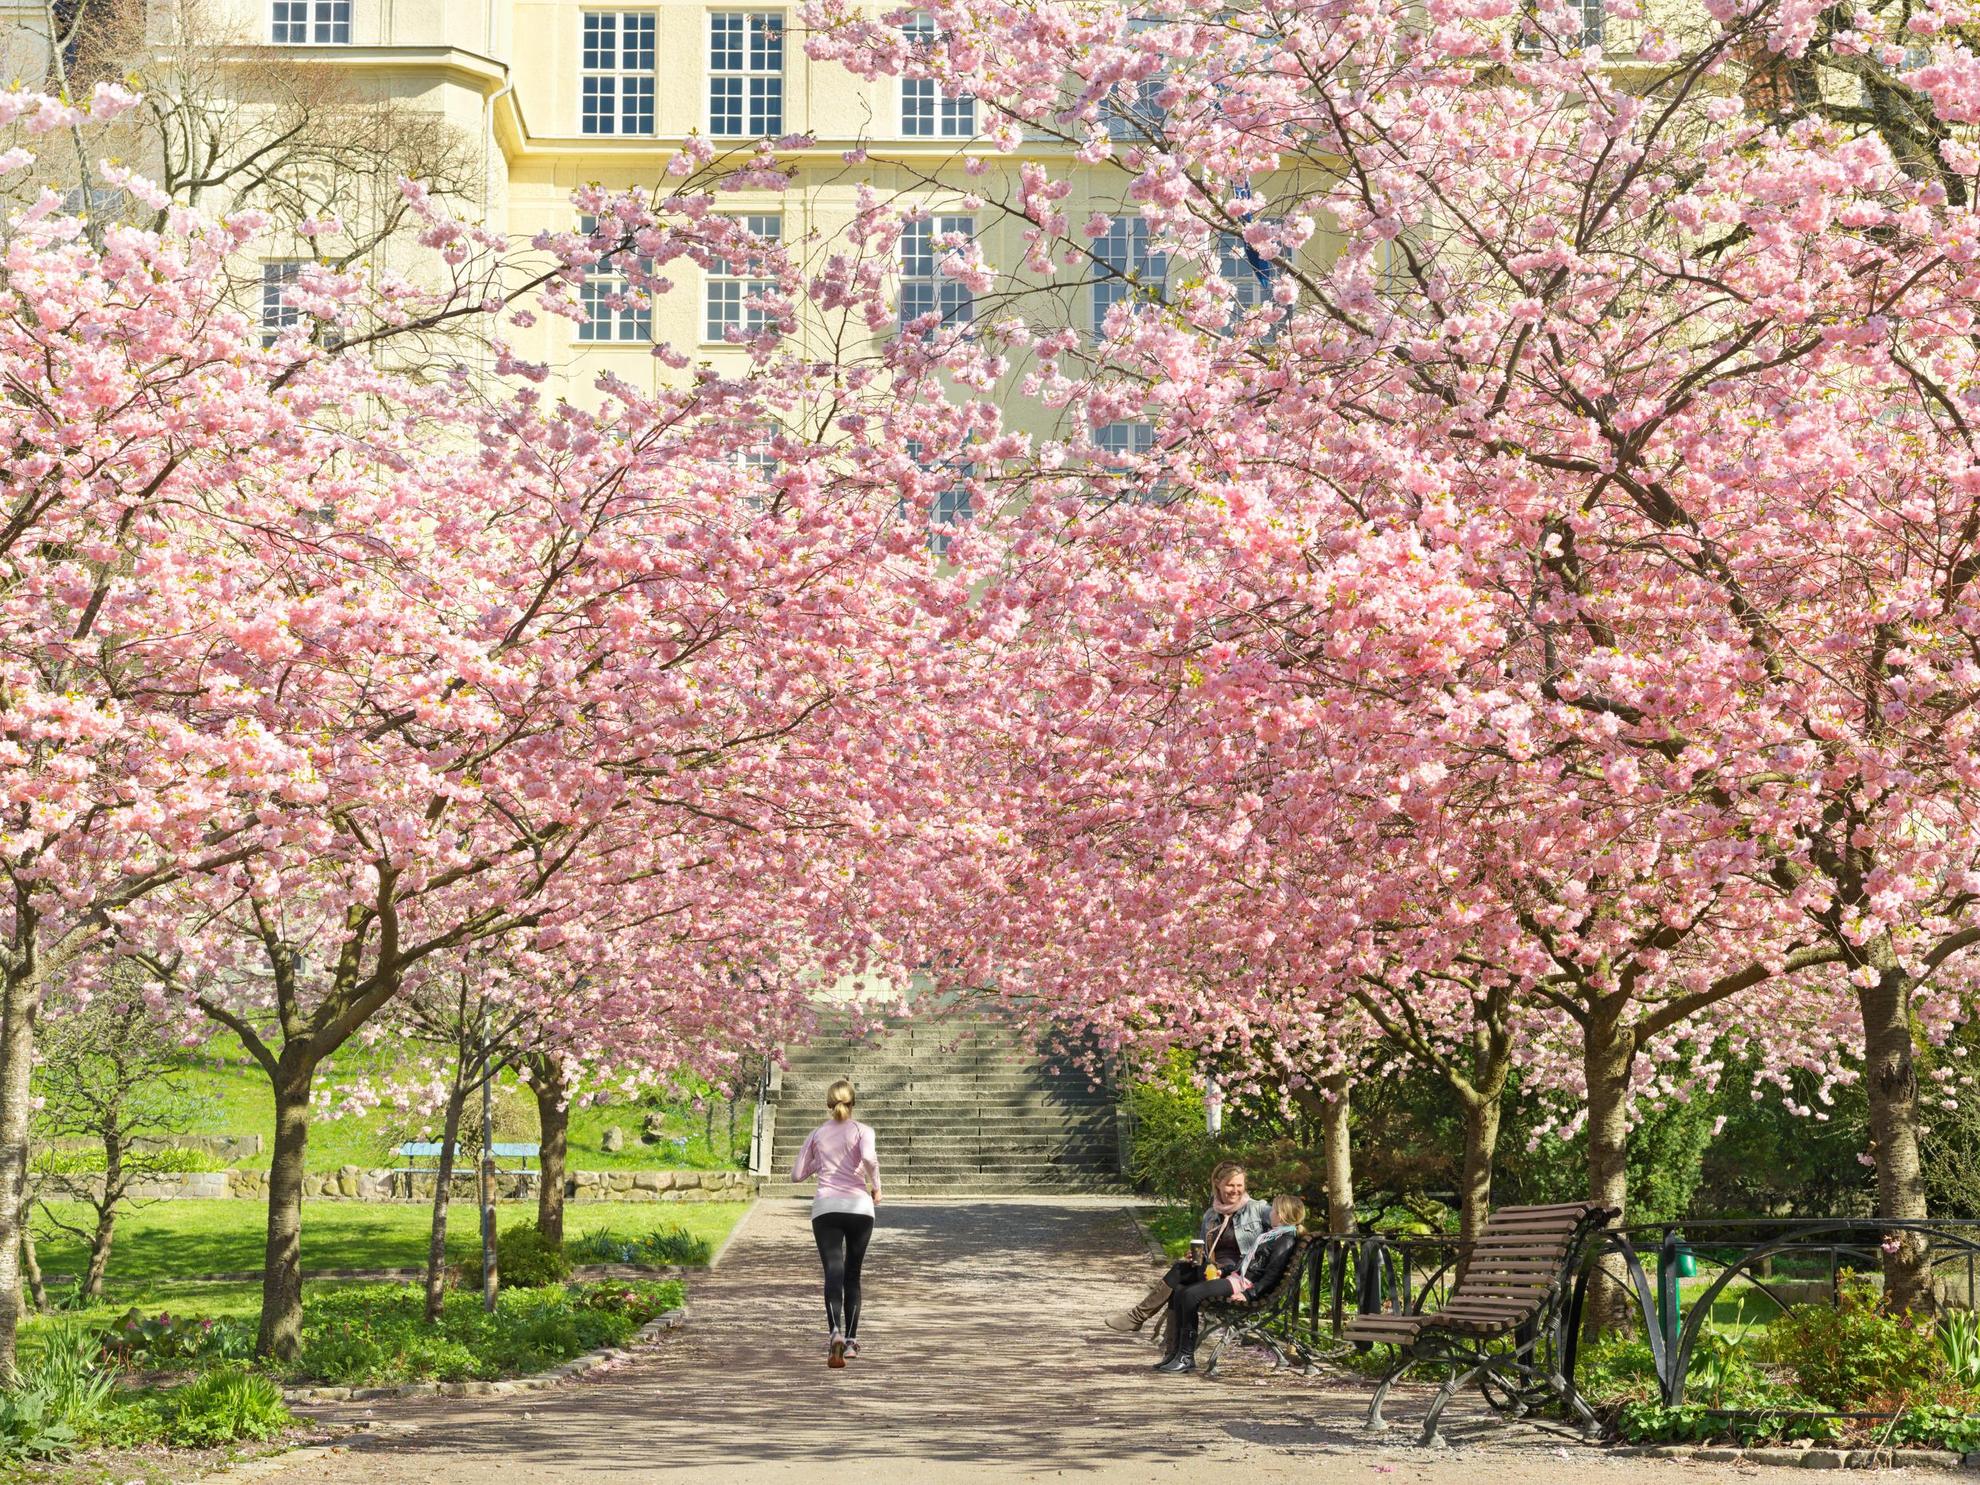 A woman is jogging and two women are sitting on a bench in a park full of blooming cherry blossoms trees.